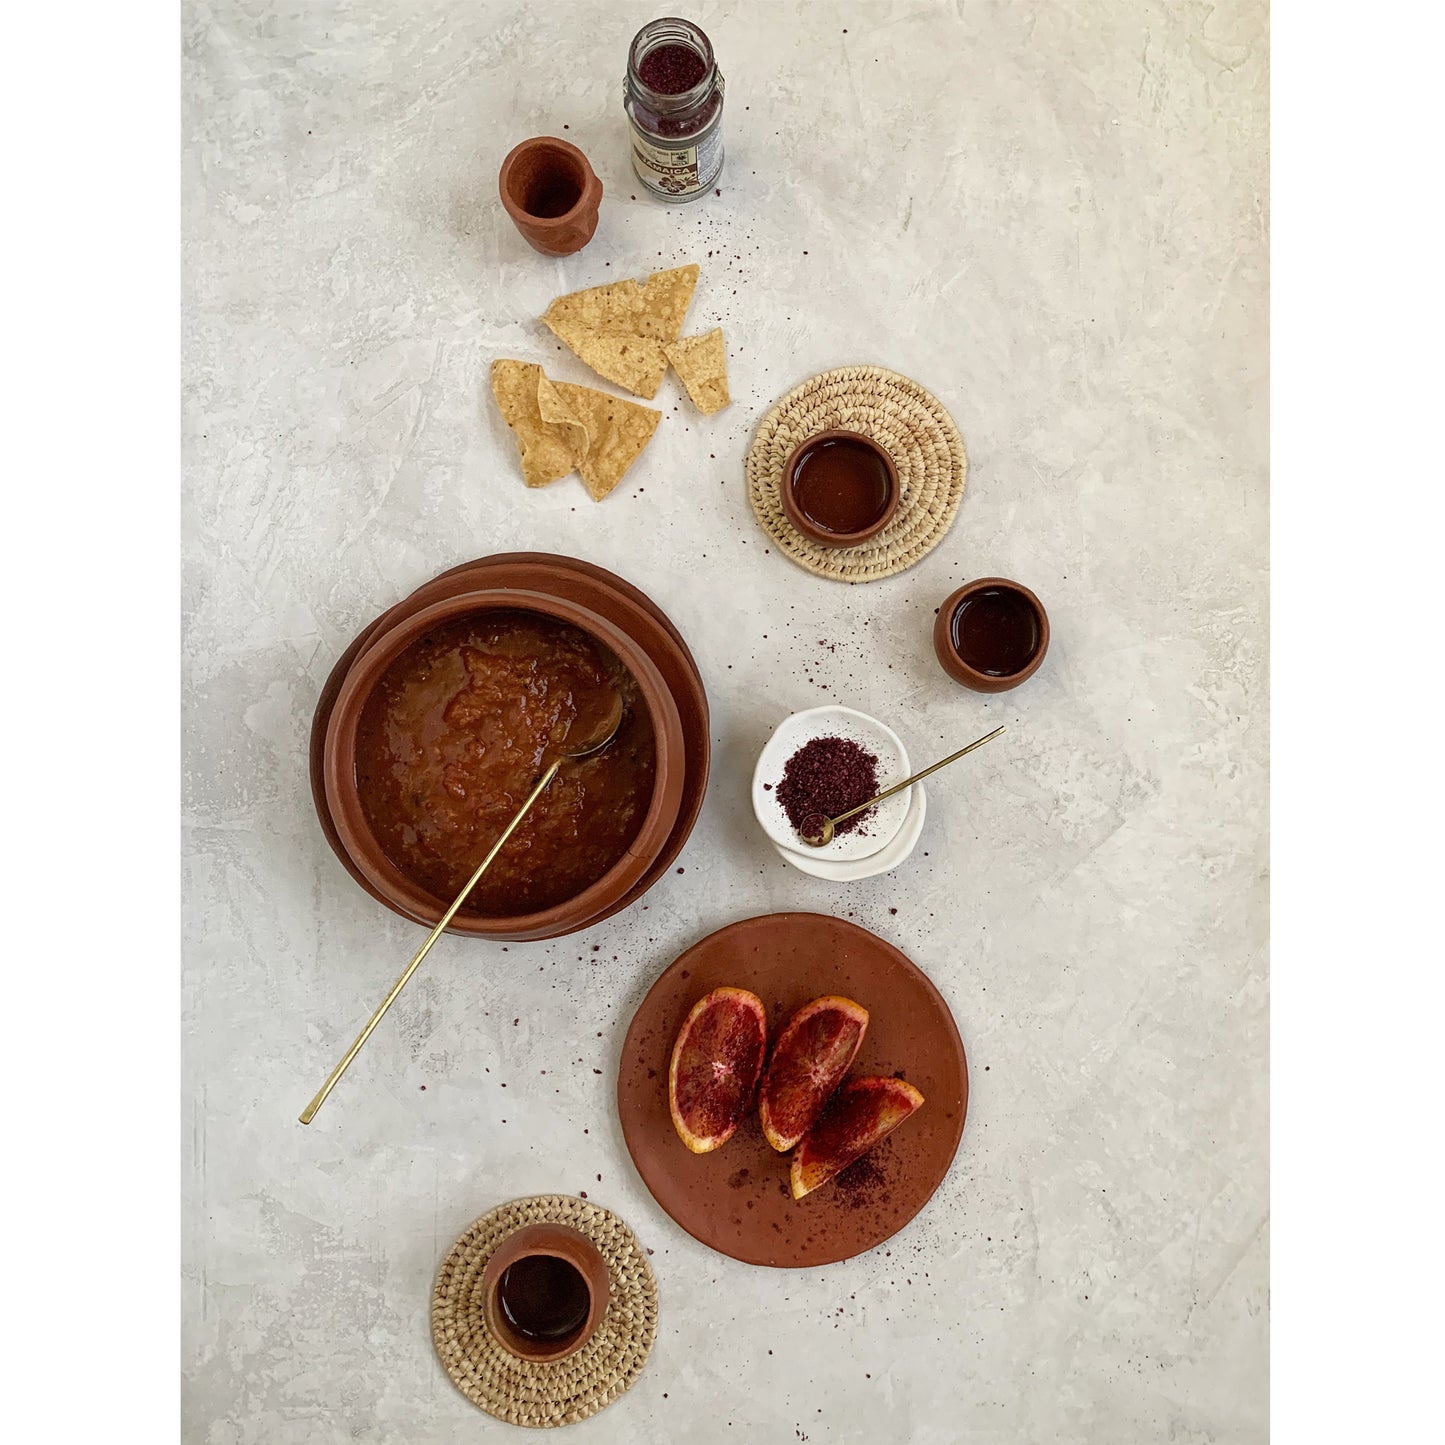 Oaxacan Red Clay Mezcal Copitas Tasting Set with or without Sal de Gusano (Agave Worm Salt)